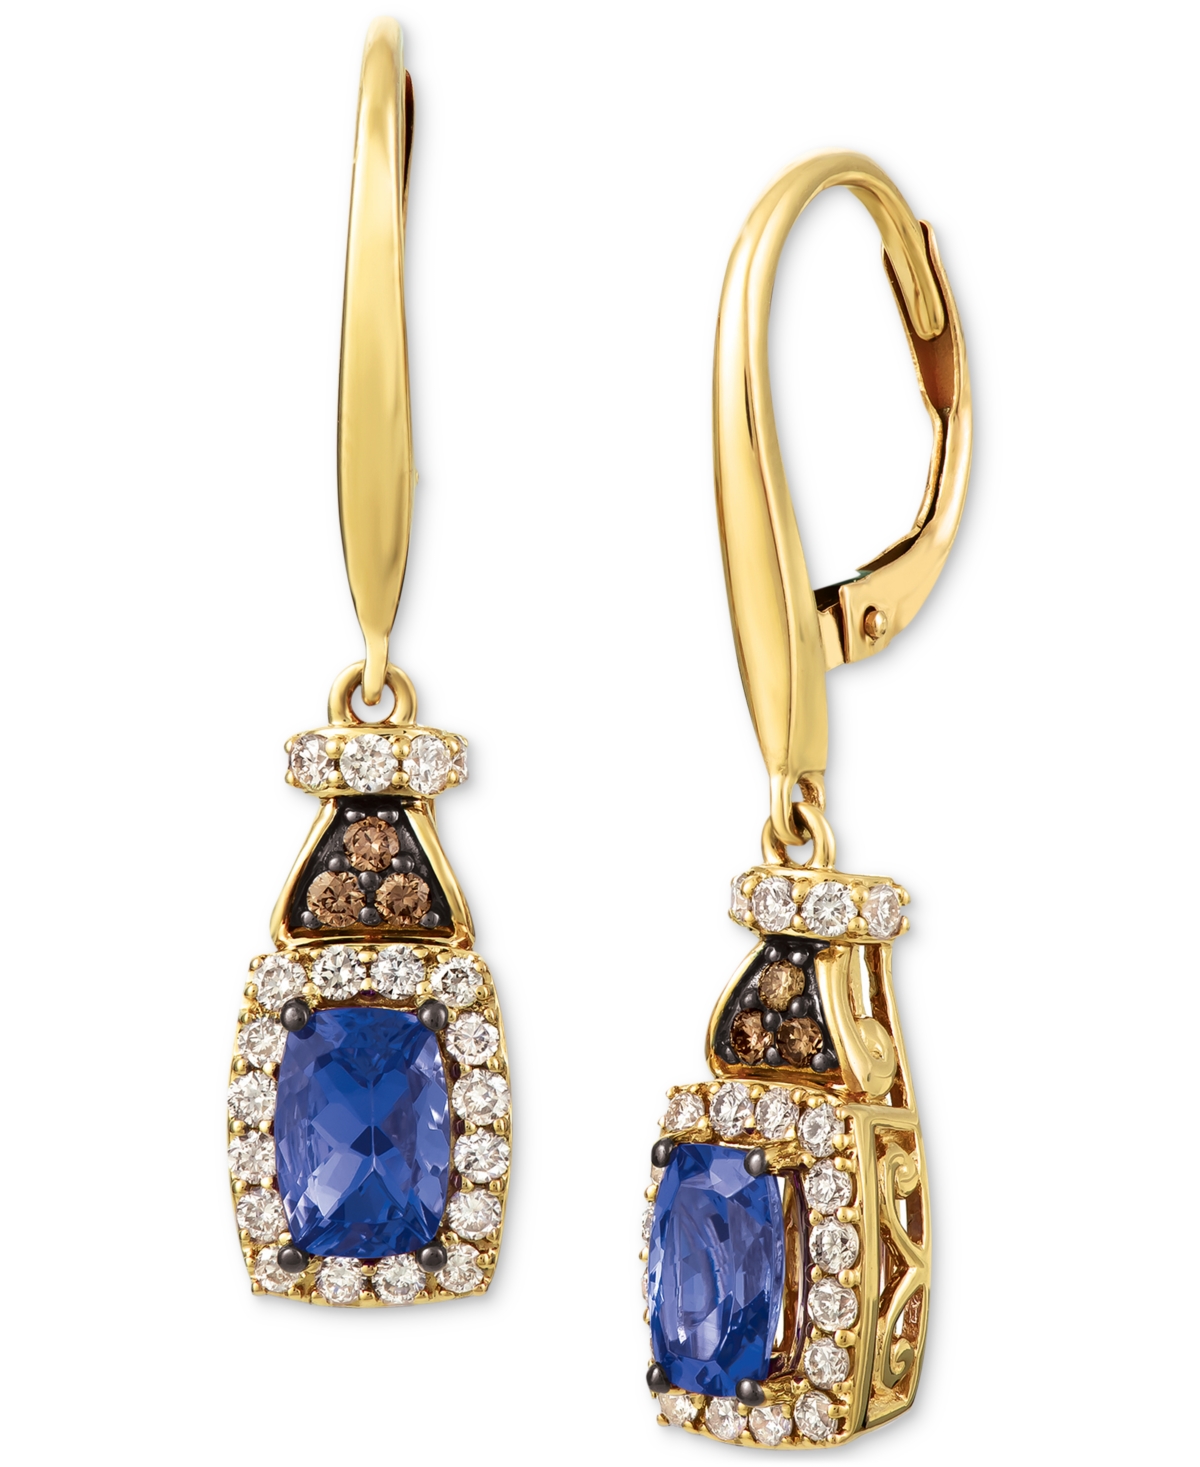 Le Vian Blueberry Tanzanite (3/4 ct. t.w.) & Diamond (3/8 ct. t.w.) Leverback Drop Earrings in 14k White Gold (Also available in 14K Gold)